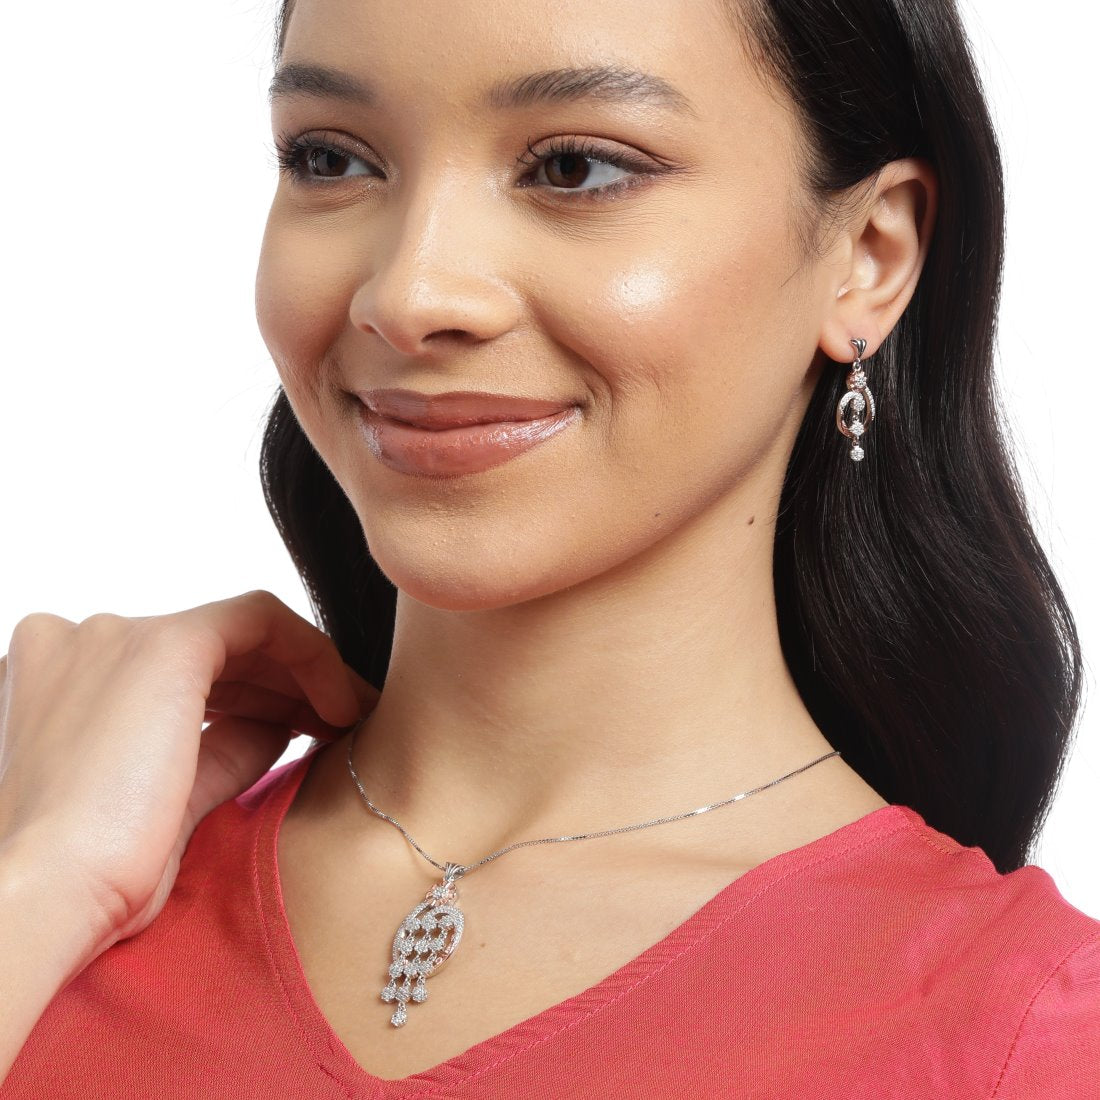 Dual Radiance Sparkle Dual Tone-Plated 925 Sterling Silver Jewelry Set